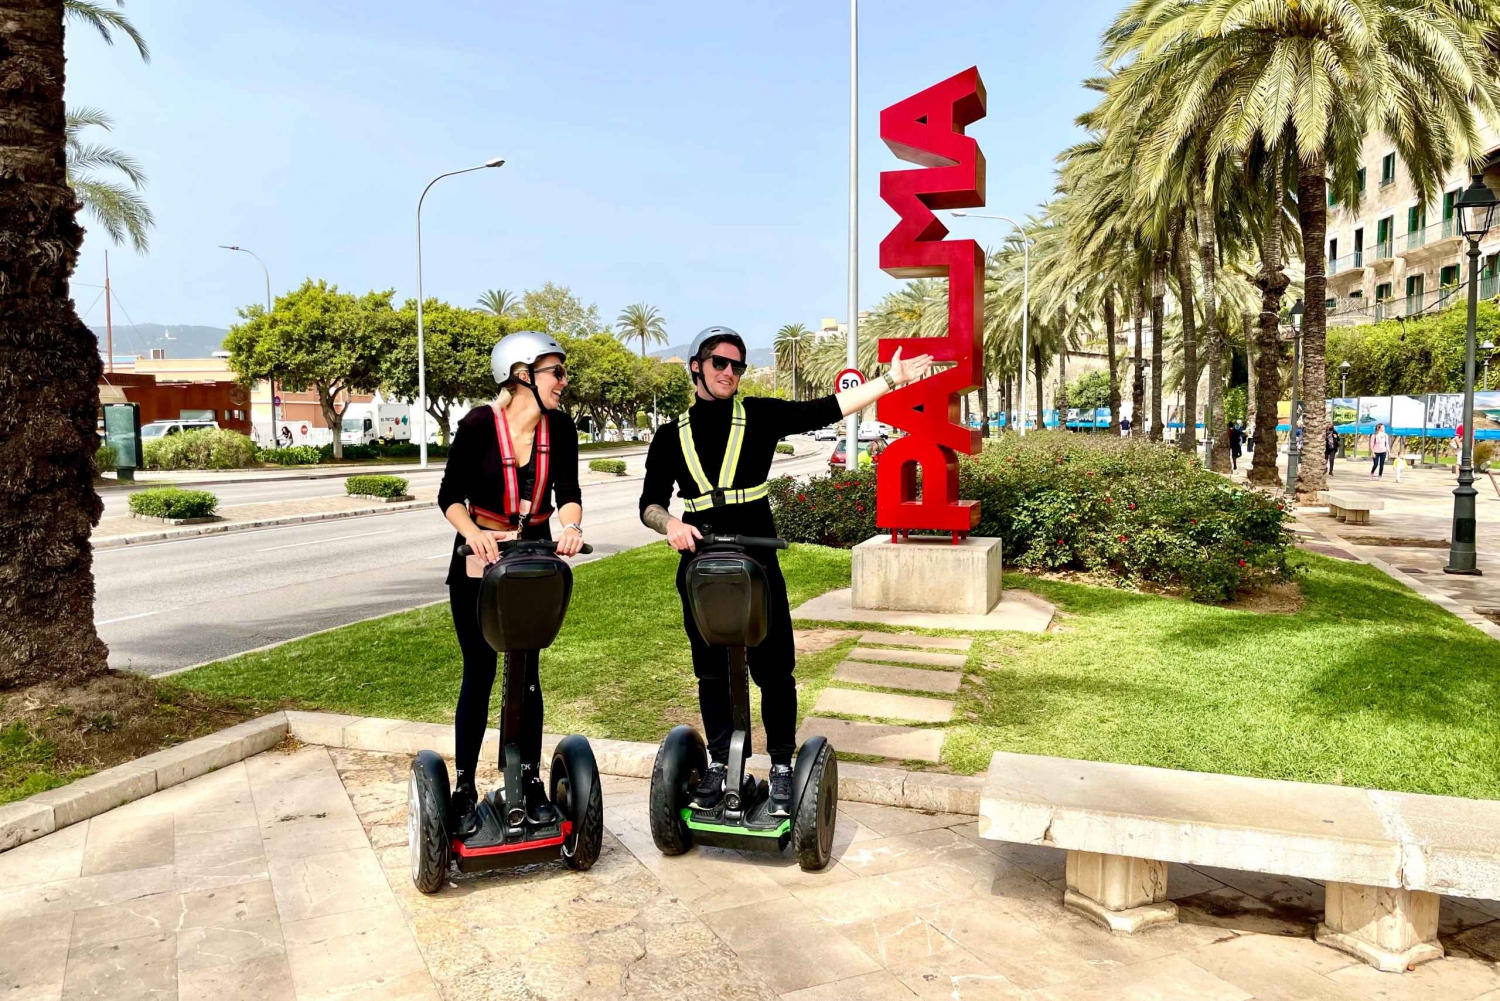 Palma: Private Guided Segway Tour